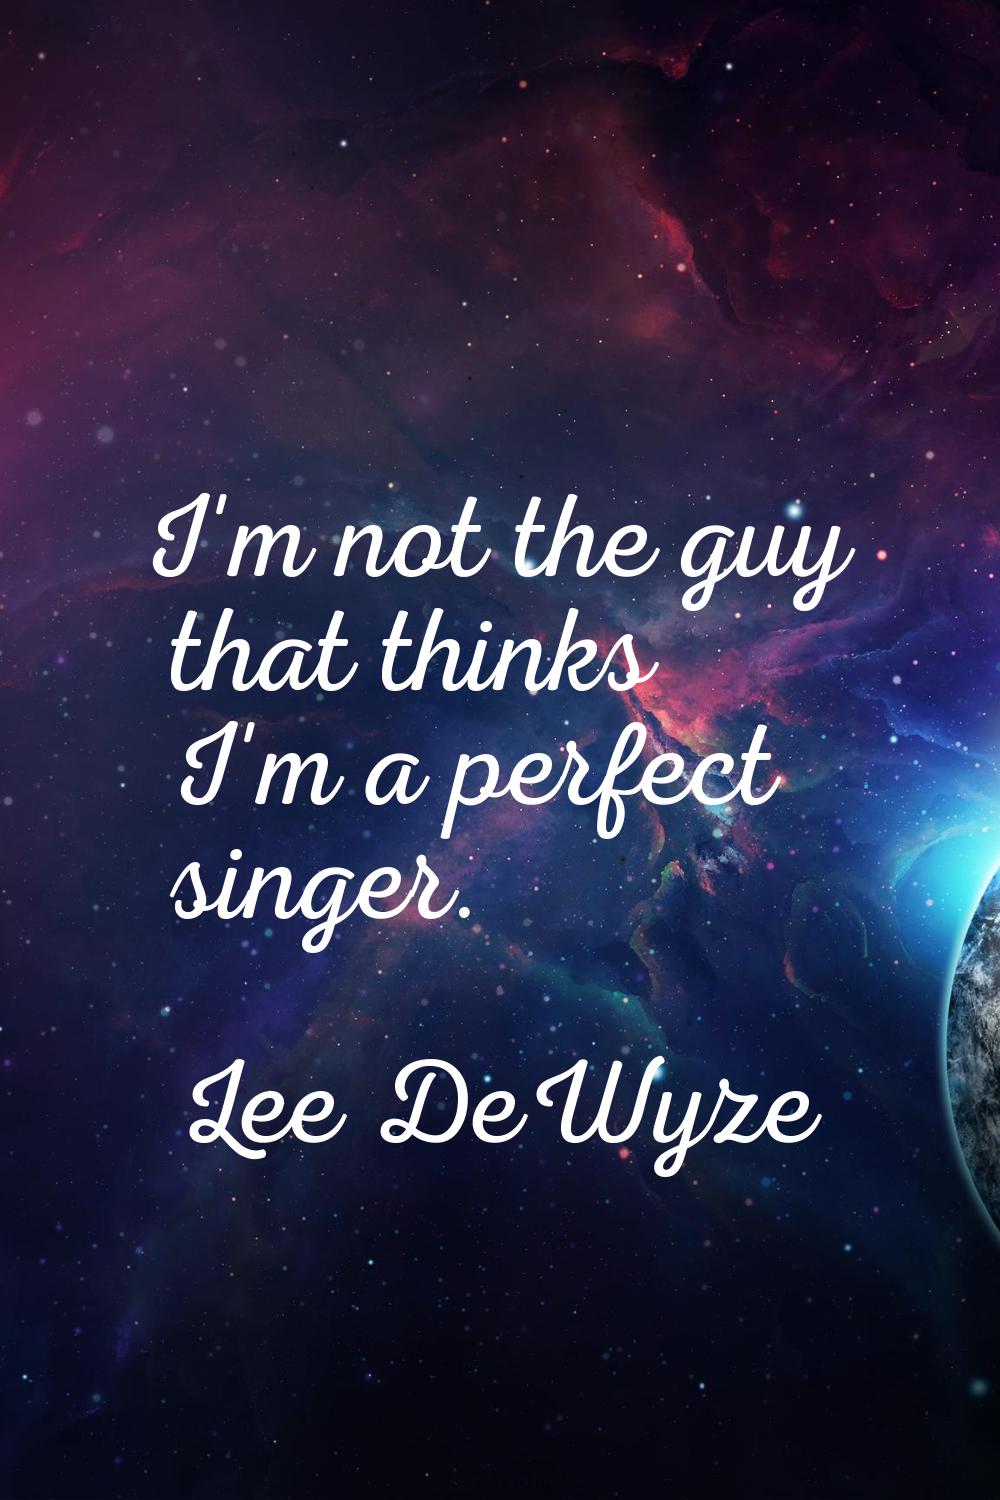 I'm not the guy that thinks I'm a perfect singer.